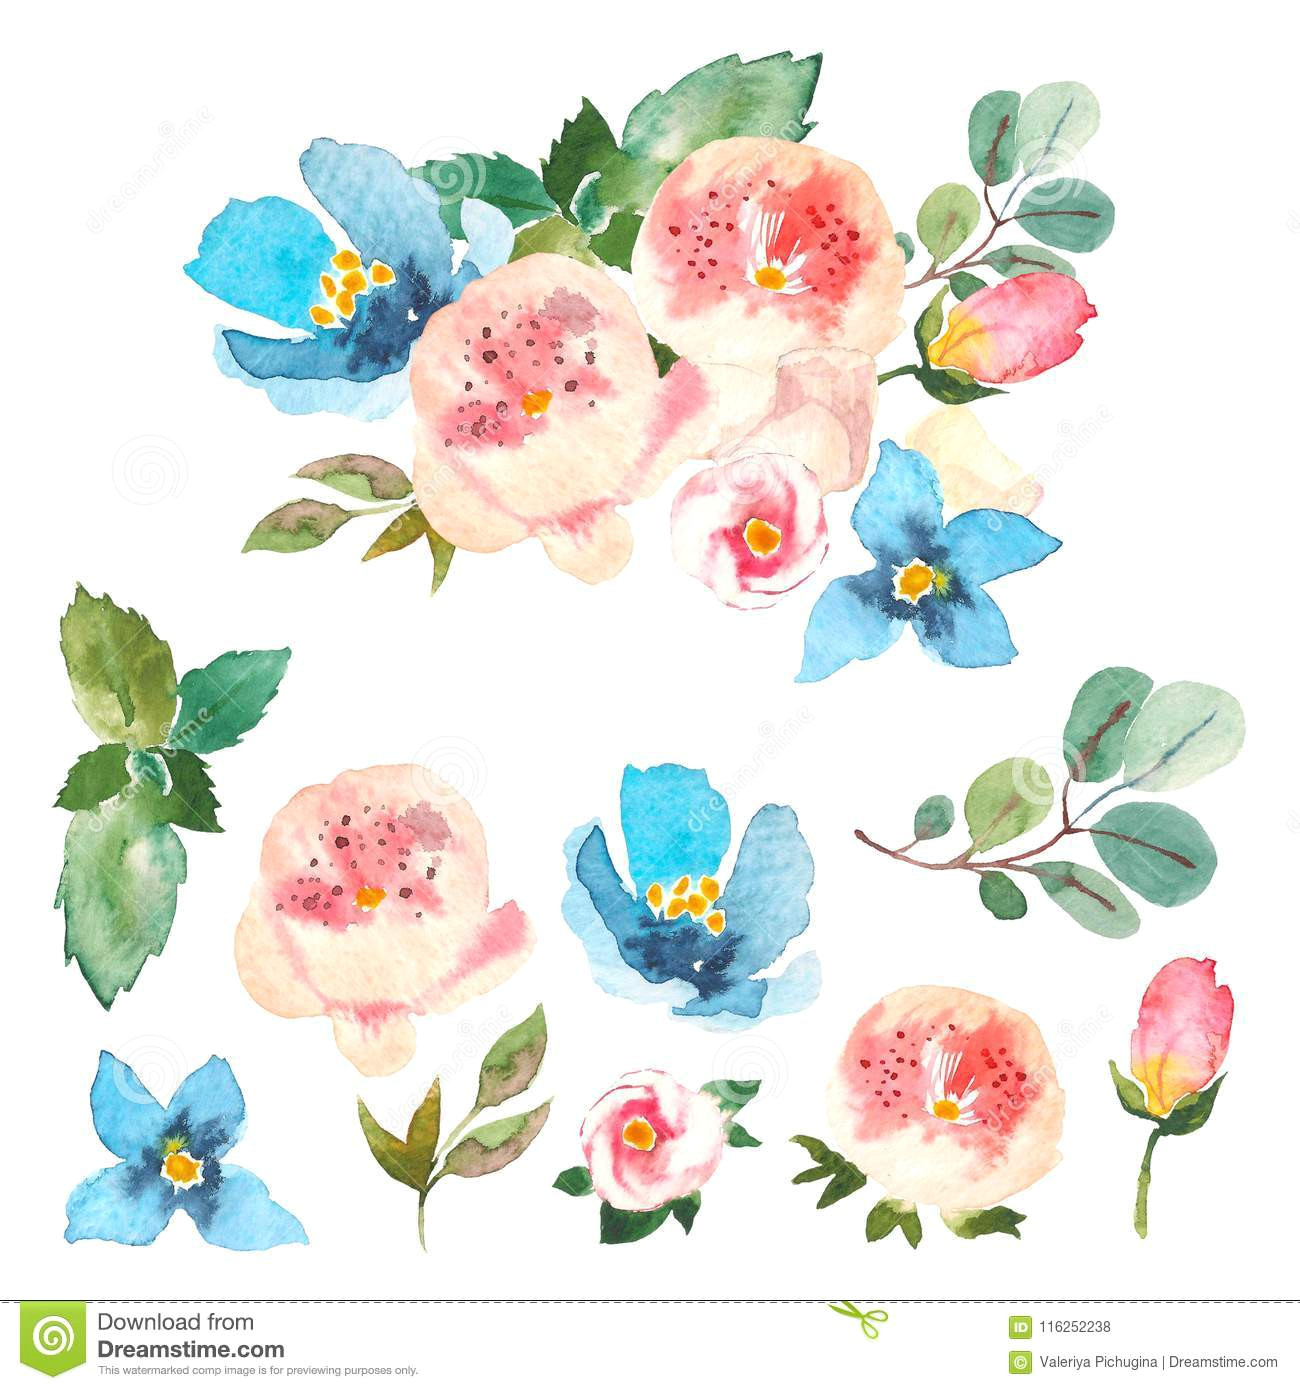 Drawing Of Flowers with Leaves Watercolor Floral Set Colorful Floral Collection with Leaves and